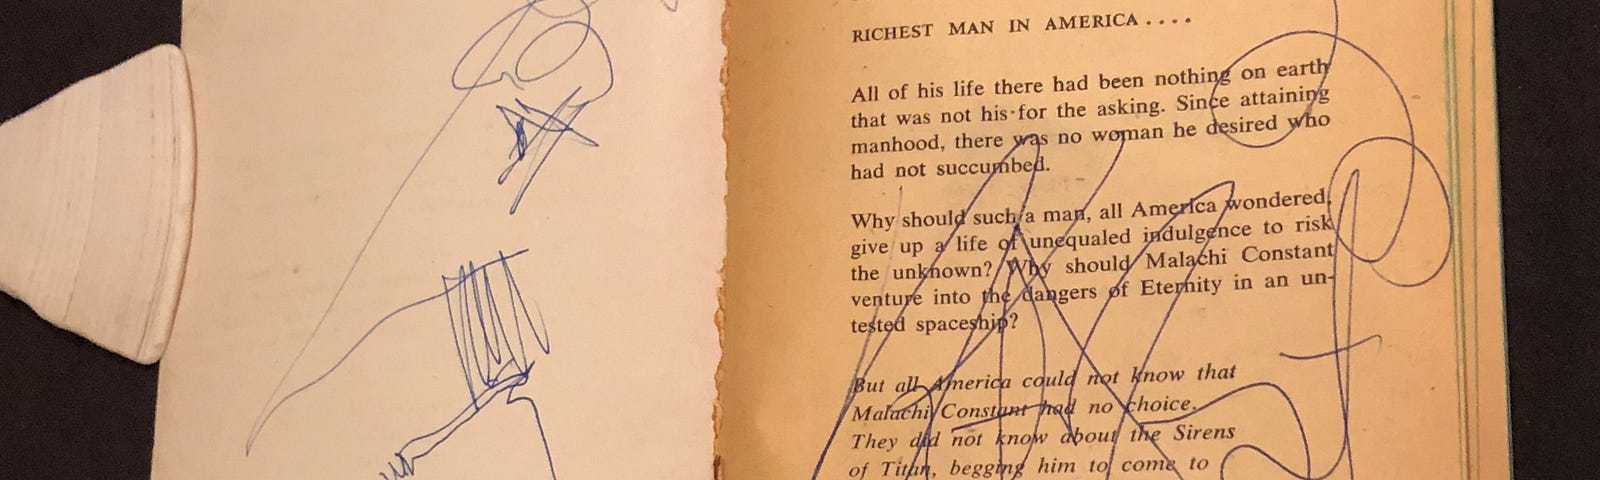 A self-portrait drawn by Kurt Vonnegut on the inside cover of one of his first edition paperbacks (The Sirens of Titans).